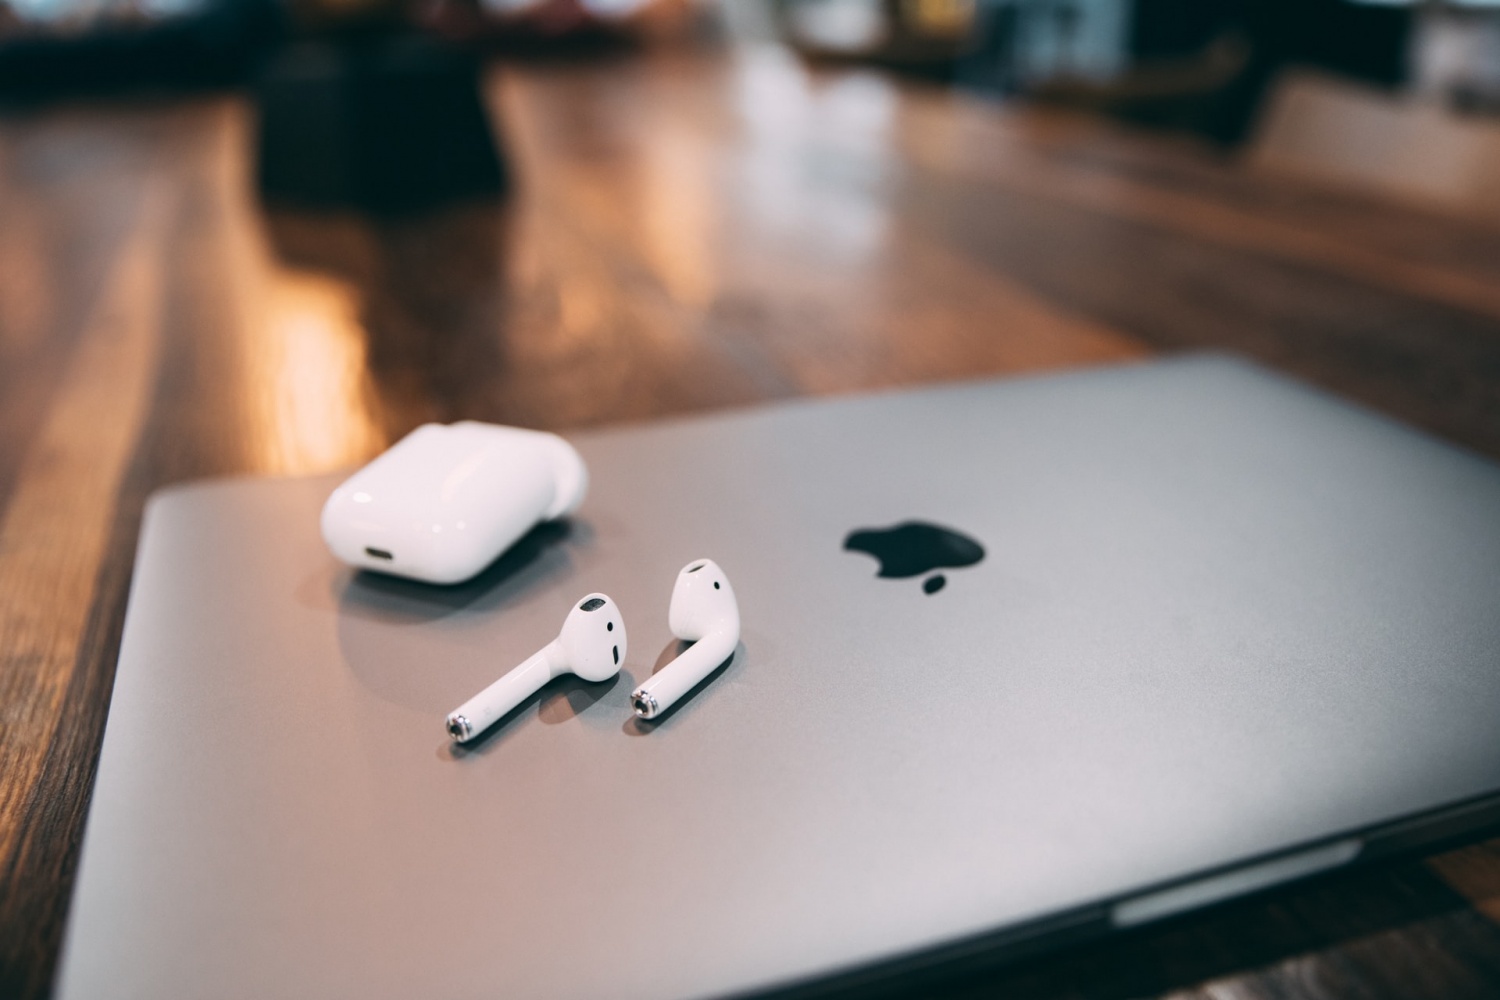 apple-airpods-3-vs-airpods-2-new-noise-cancellation-feature-wireless-chip-design-changes-other-rumored-differences